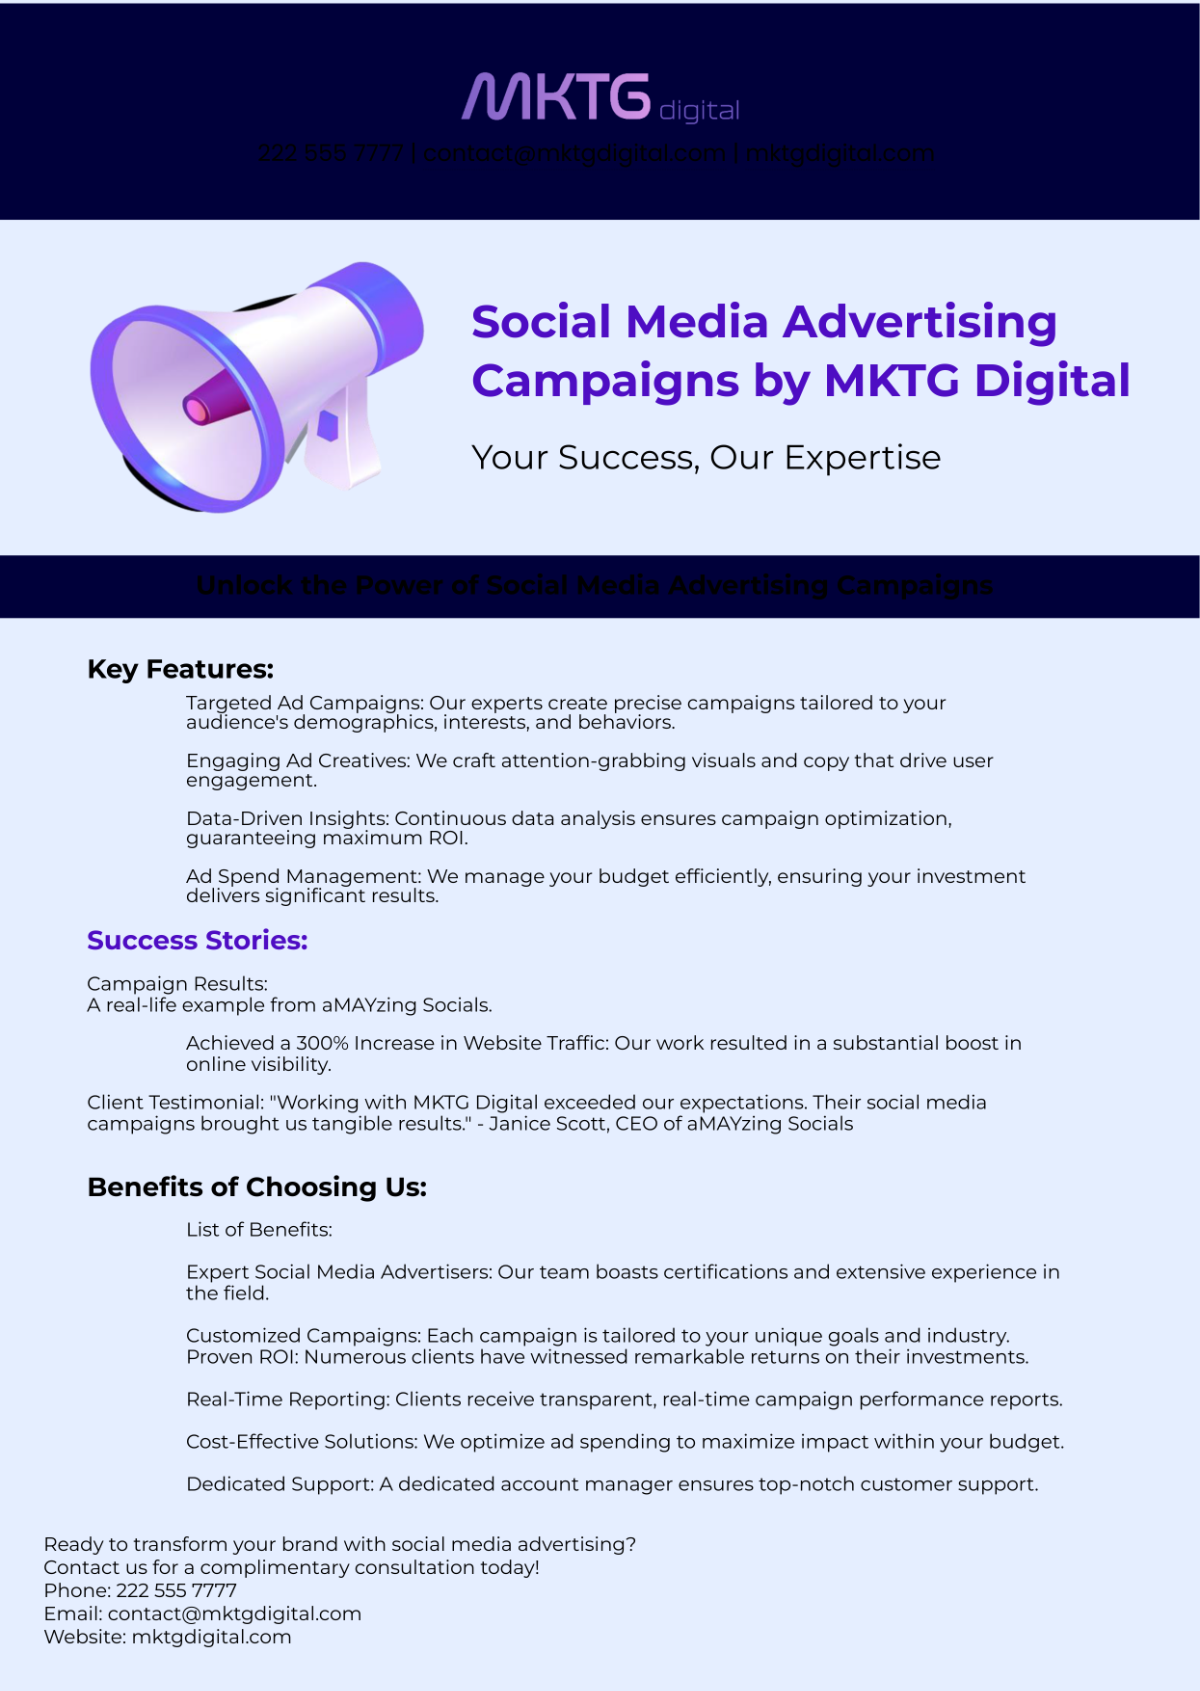 Digital Marketing Agency Product Infographic Template